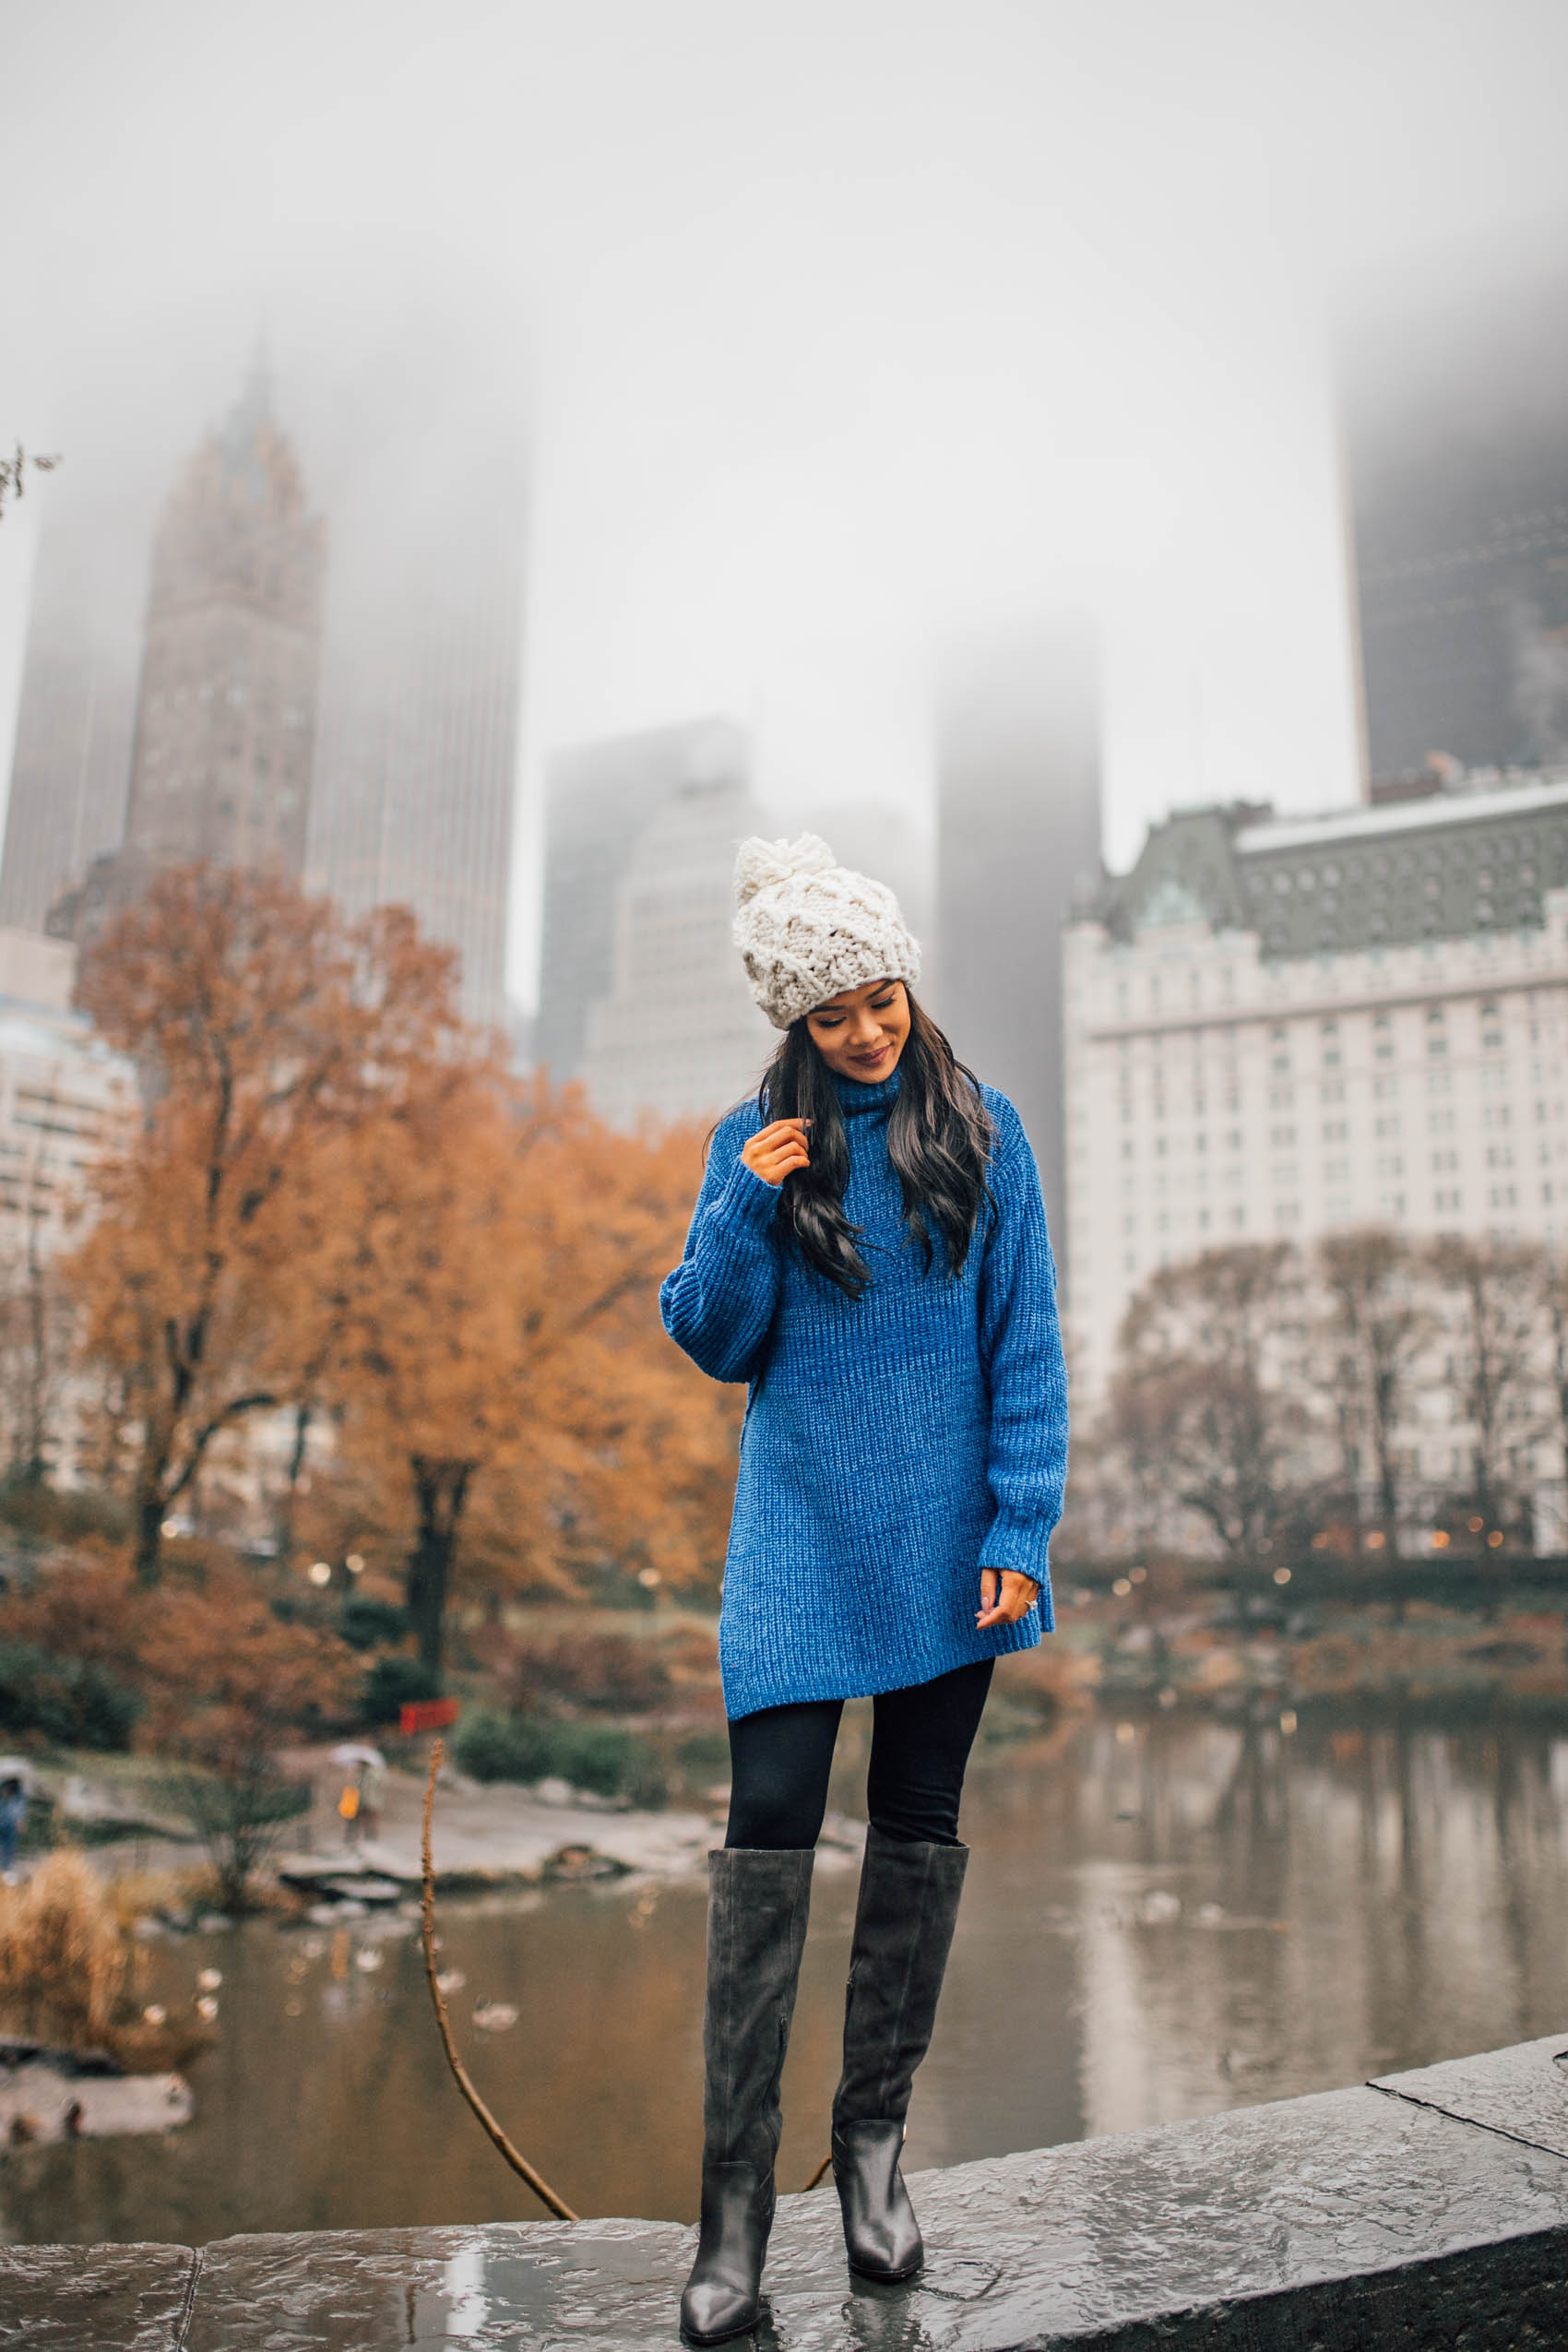 Blogger Hoang-Kim wearing a blue tunic sweater with Sole Society Daleena boots and chunky knit beanie